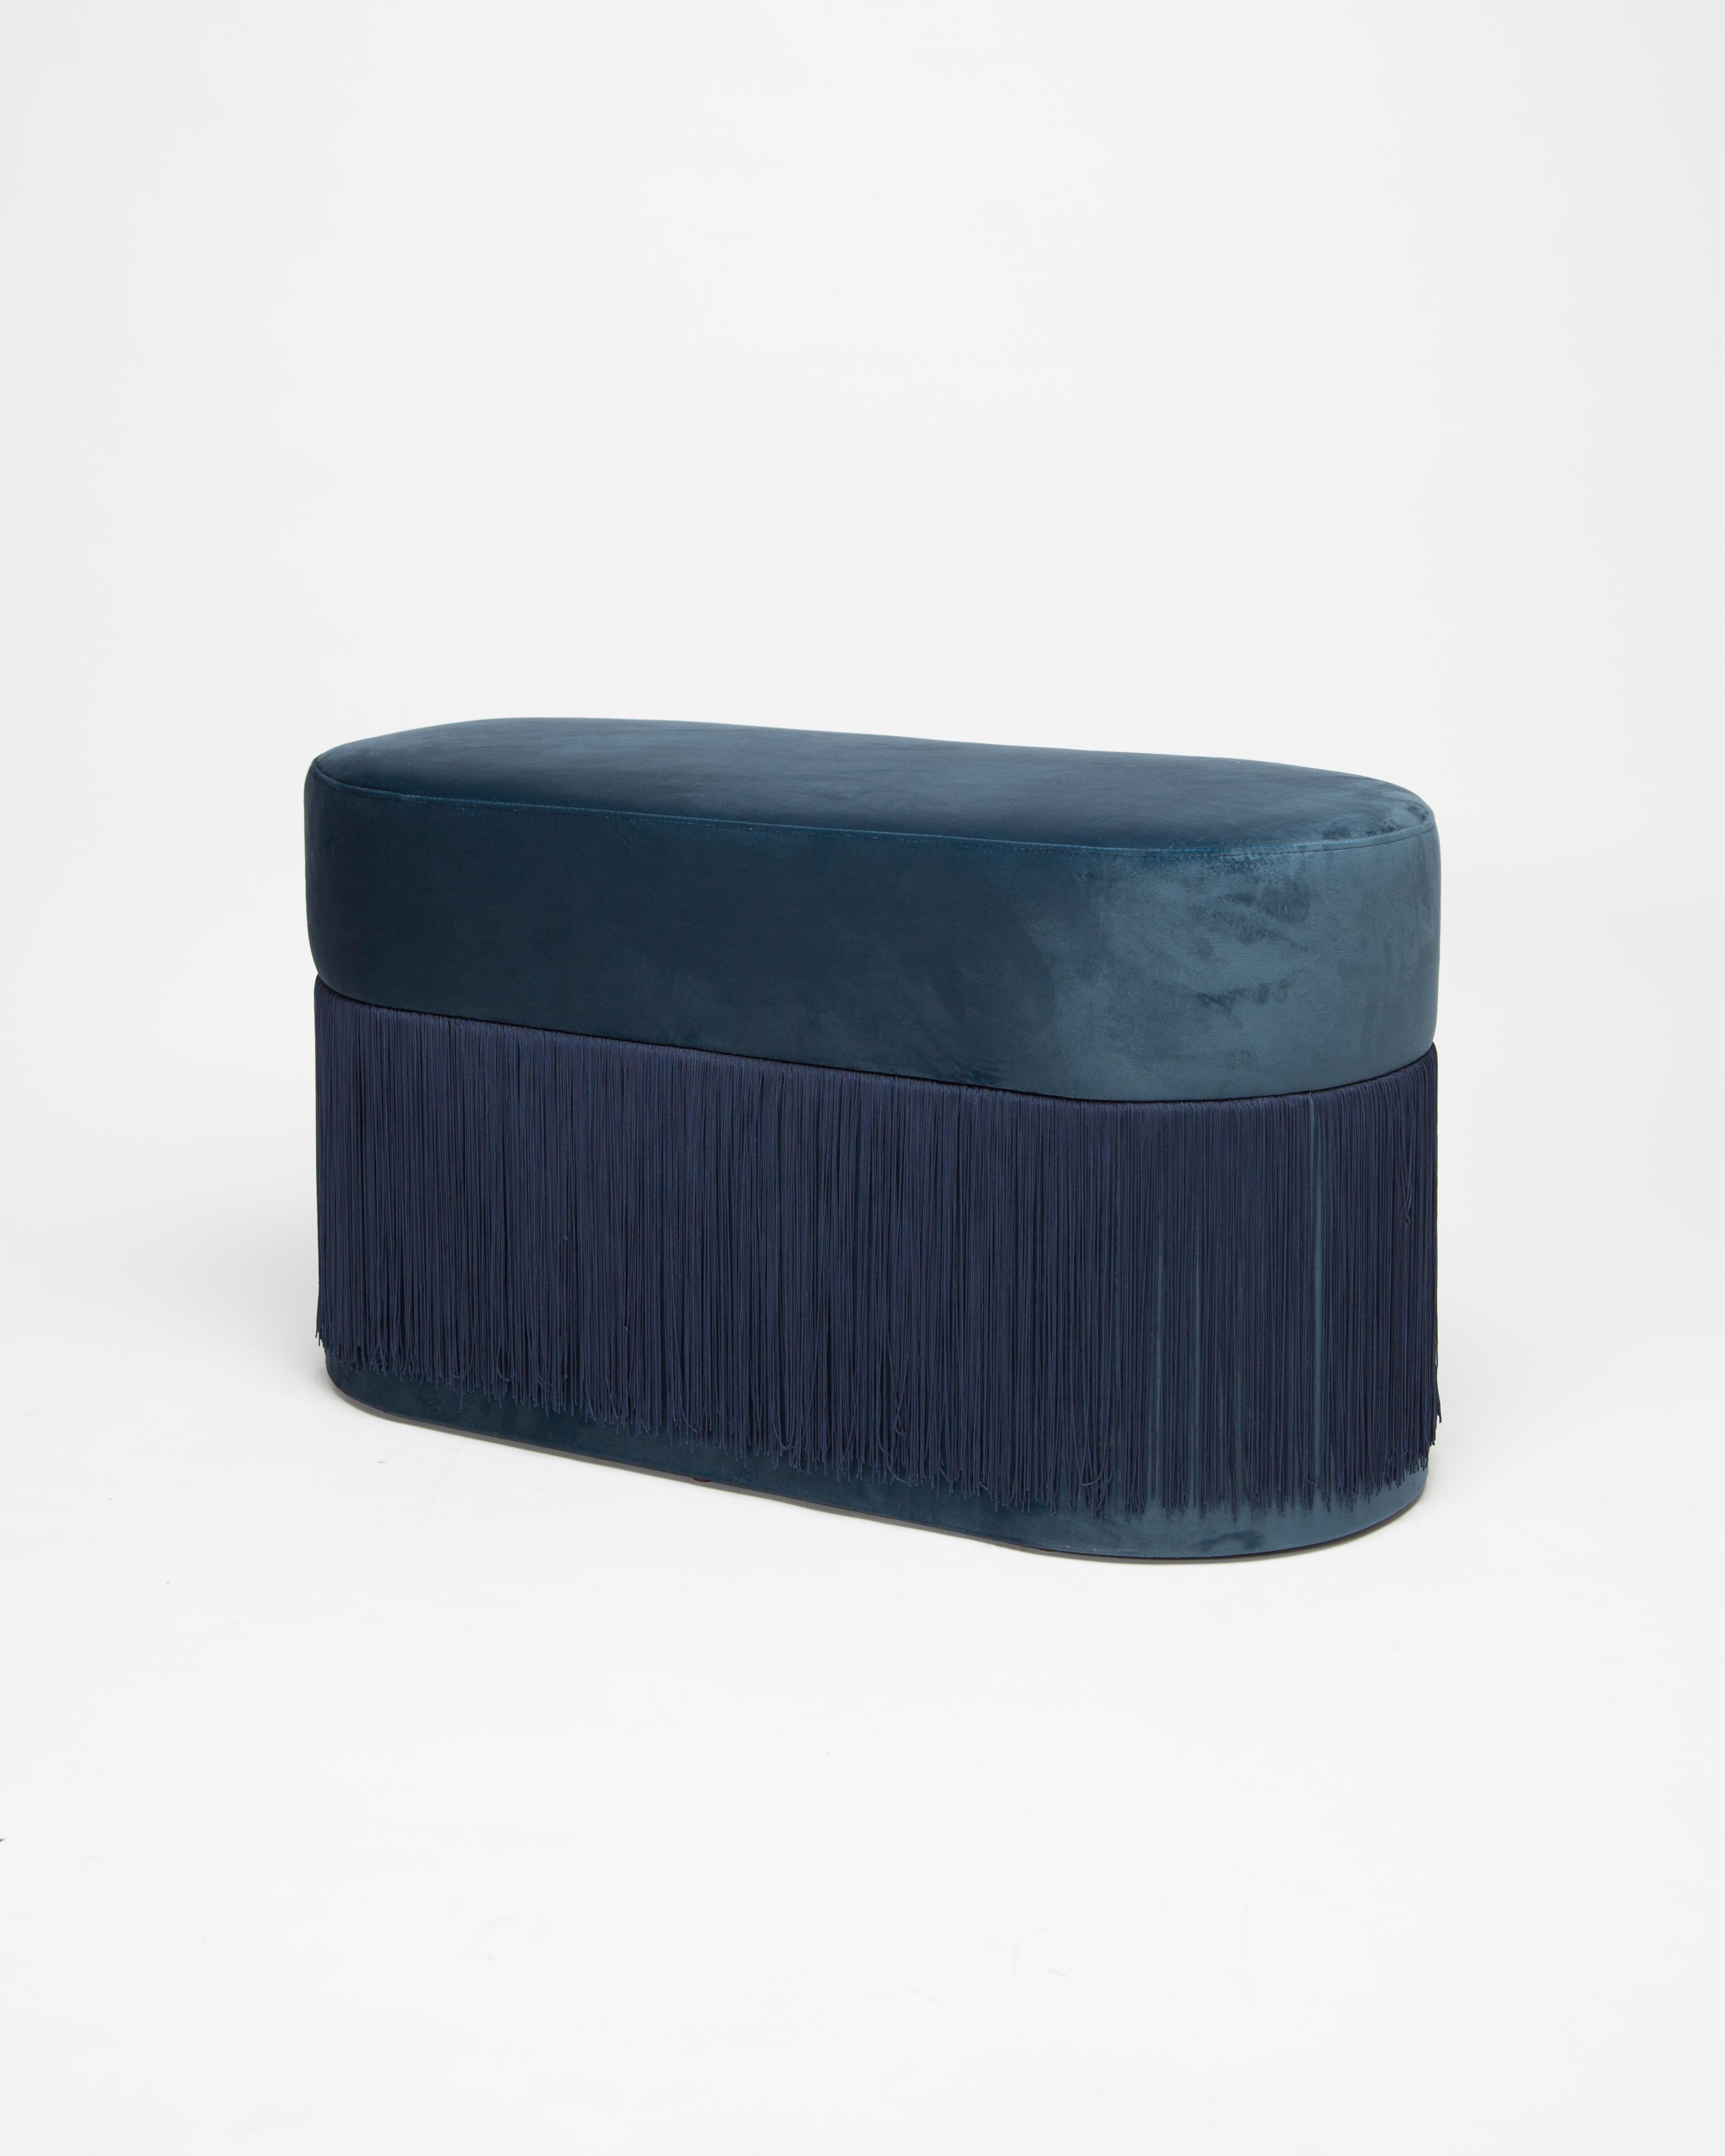 Pouf Pill L by Houtique
Dimensions: H 45 x 80 x 35 cm
Materials: Velvet upholstery and 30cm fringes

Pill Pouf L
Art-deco style pouf with wood structure and velvet fabric.
2 fiber-board discs of 16mm, joined by wooden tufts.
Upholstery Velvet